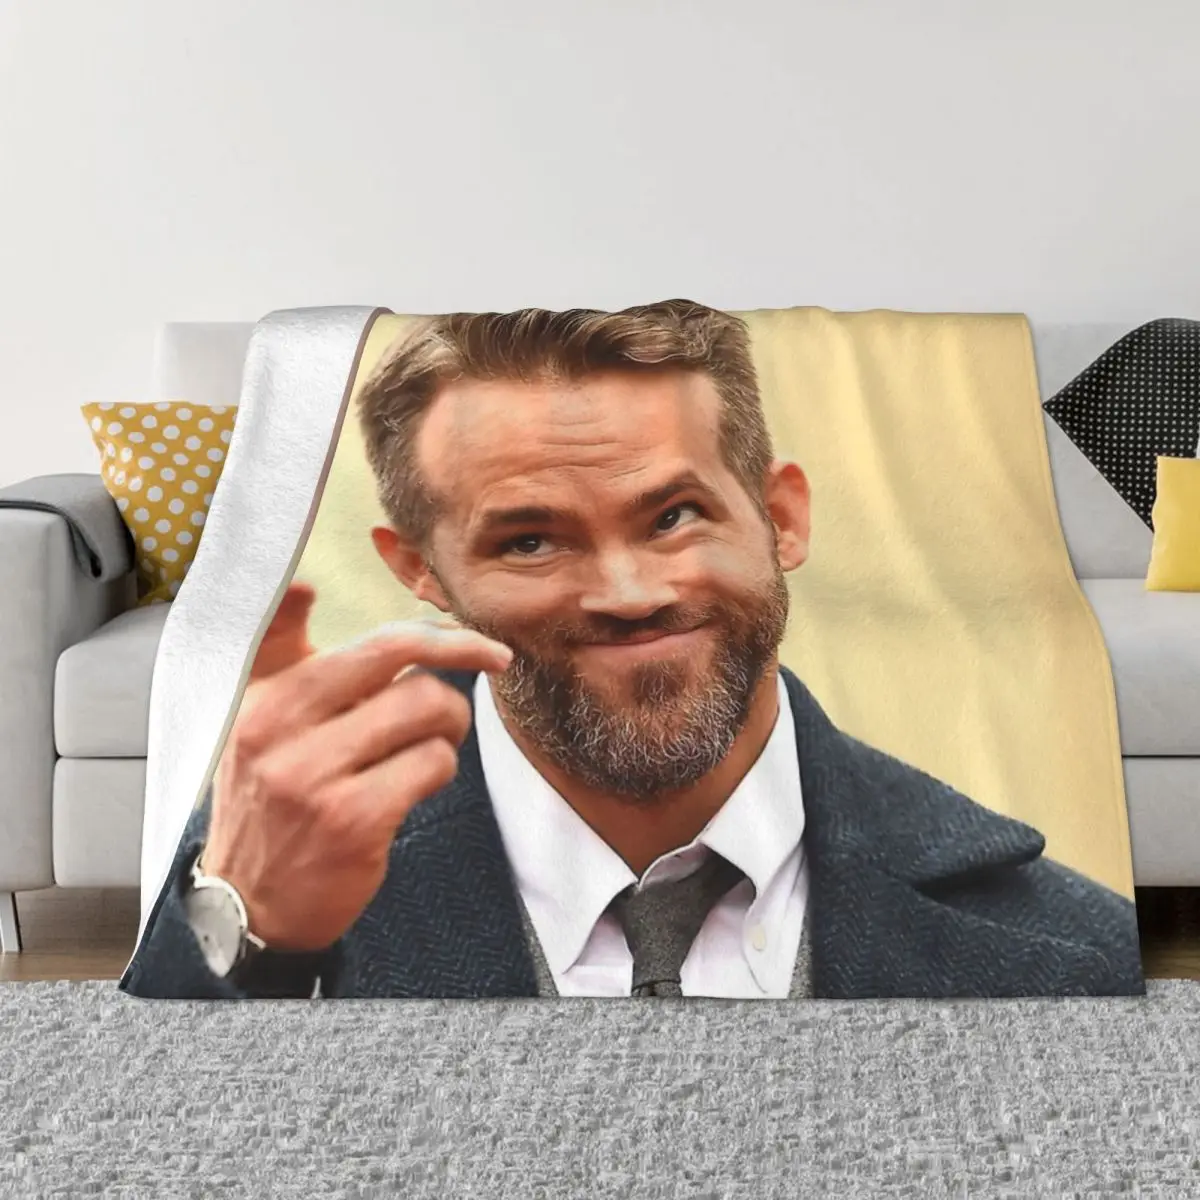 https://ae01.alicdn.com/kf/S99c9f61cd4cd4e3e83791060fe0b91626/Ryan-Reynolds-3-Blanket-Bedspread-On-The-Bed-Plush-Bedspreads-For-Double-Bed-Queen-Bed-Hairy.jpg